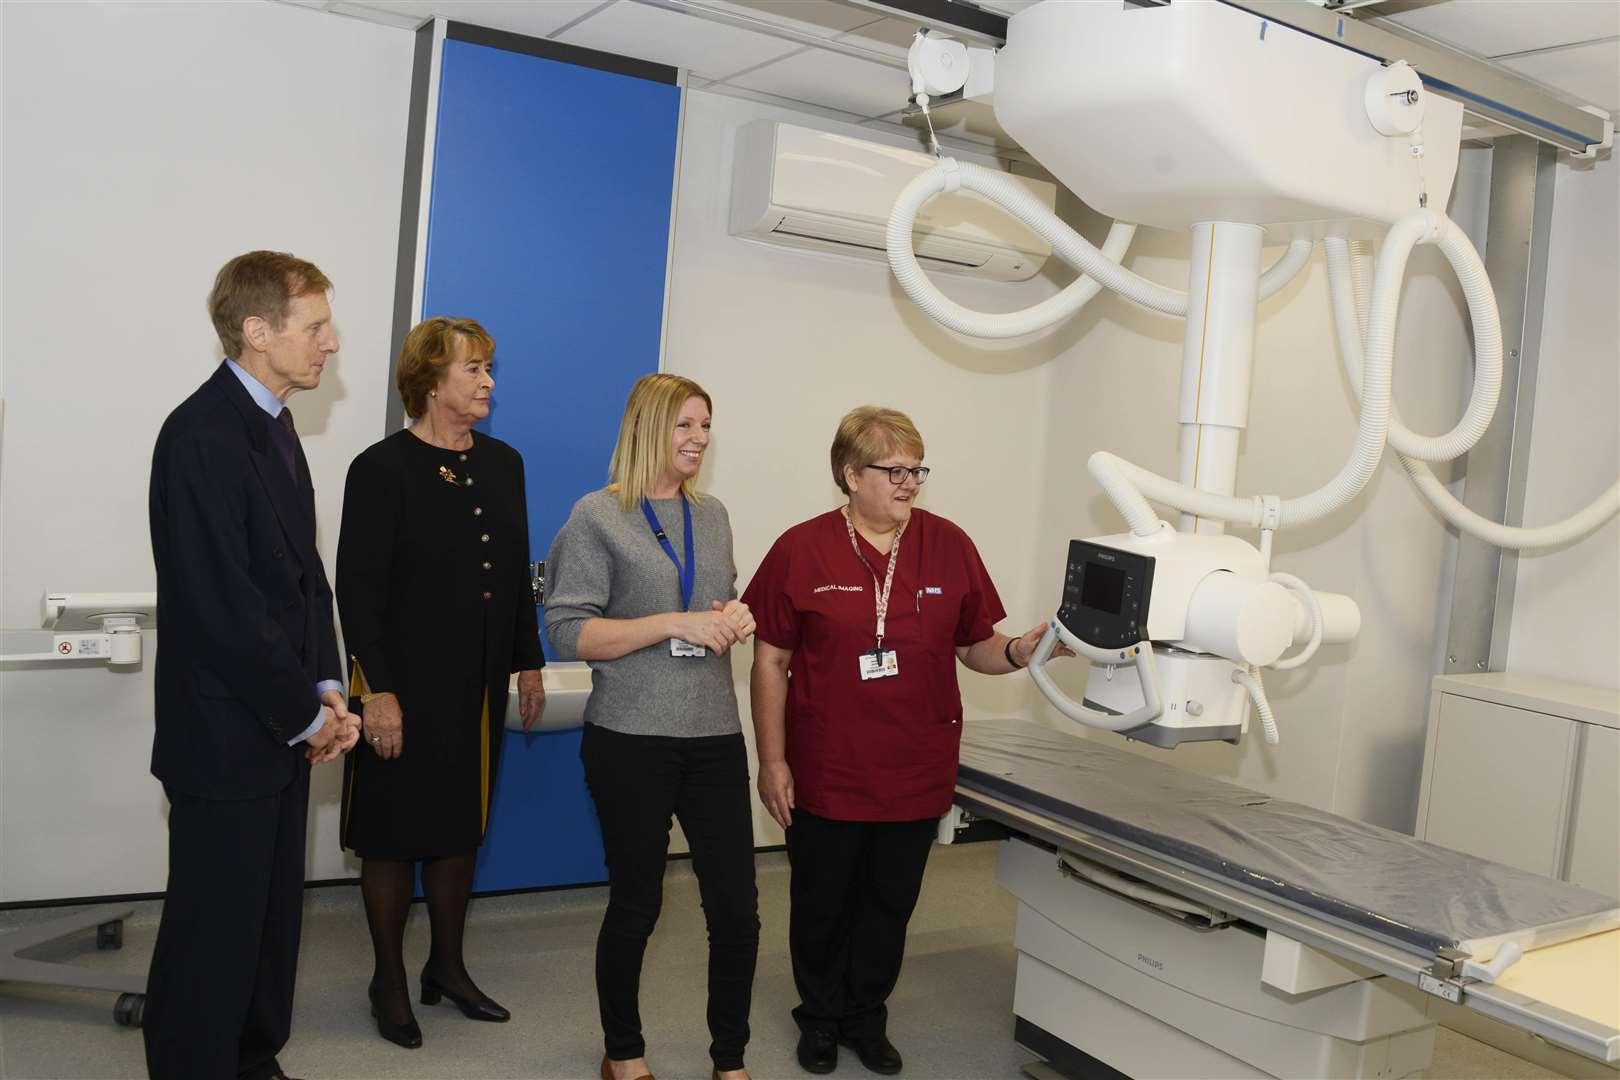 Professor Stephen Smith, League of Friends chairman Gillian Fowler, with radiographers Lara Green and Mandy Martin